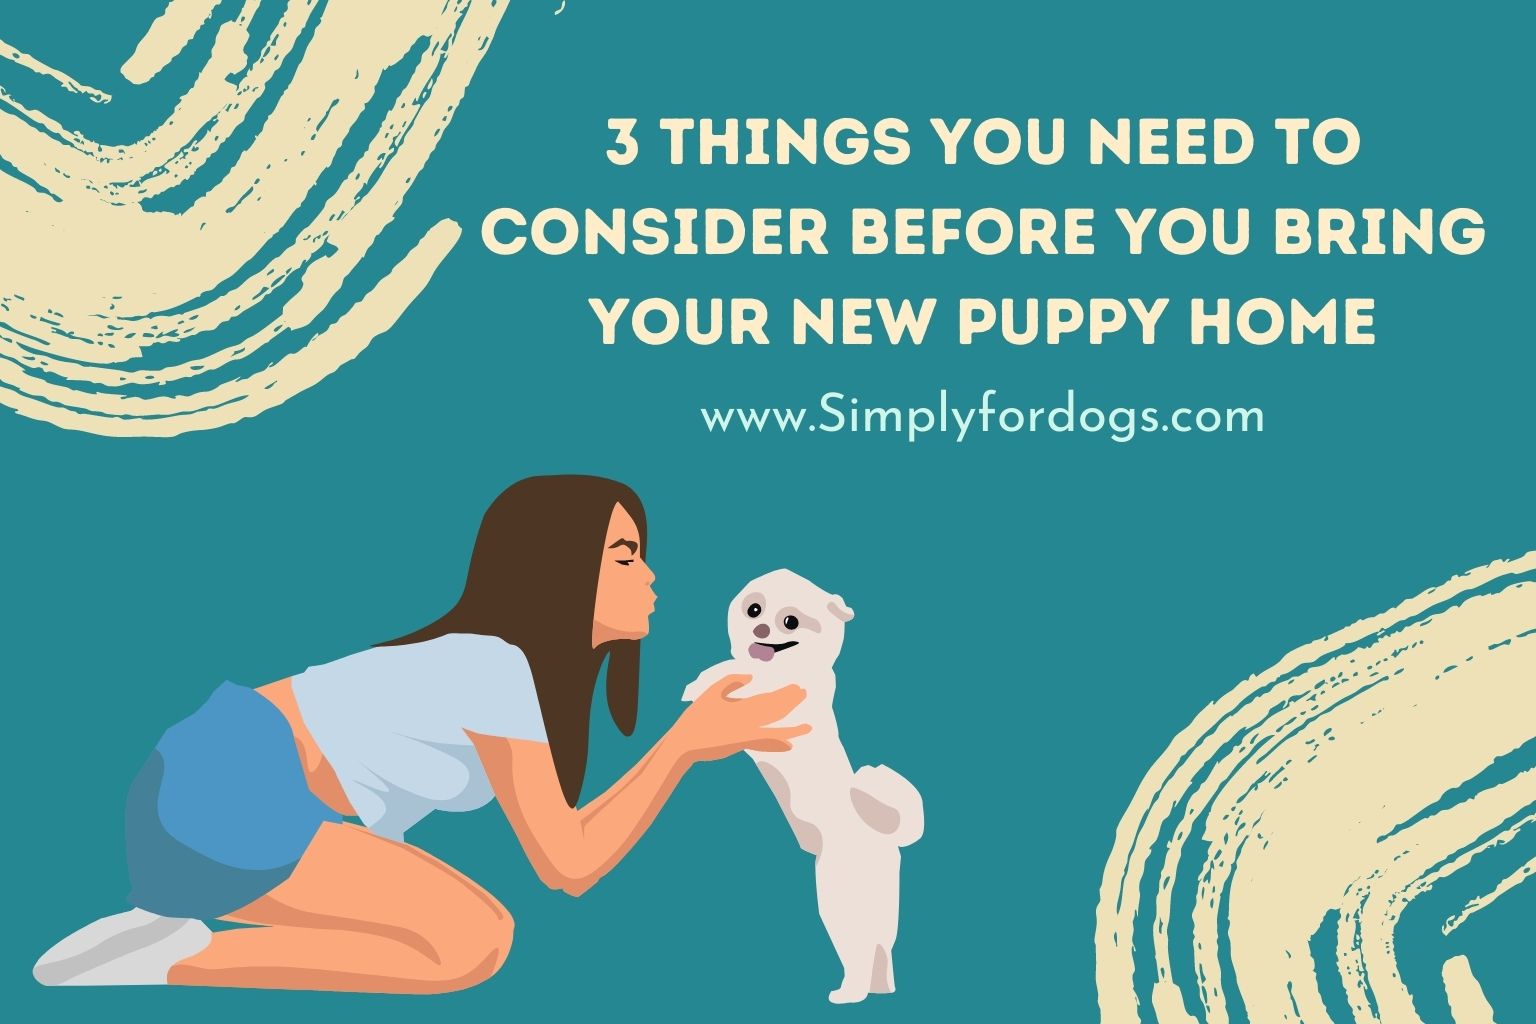 Bring Your New Puppy Home